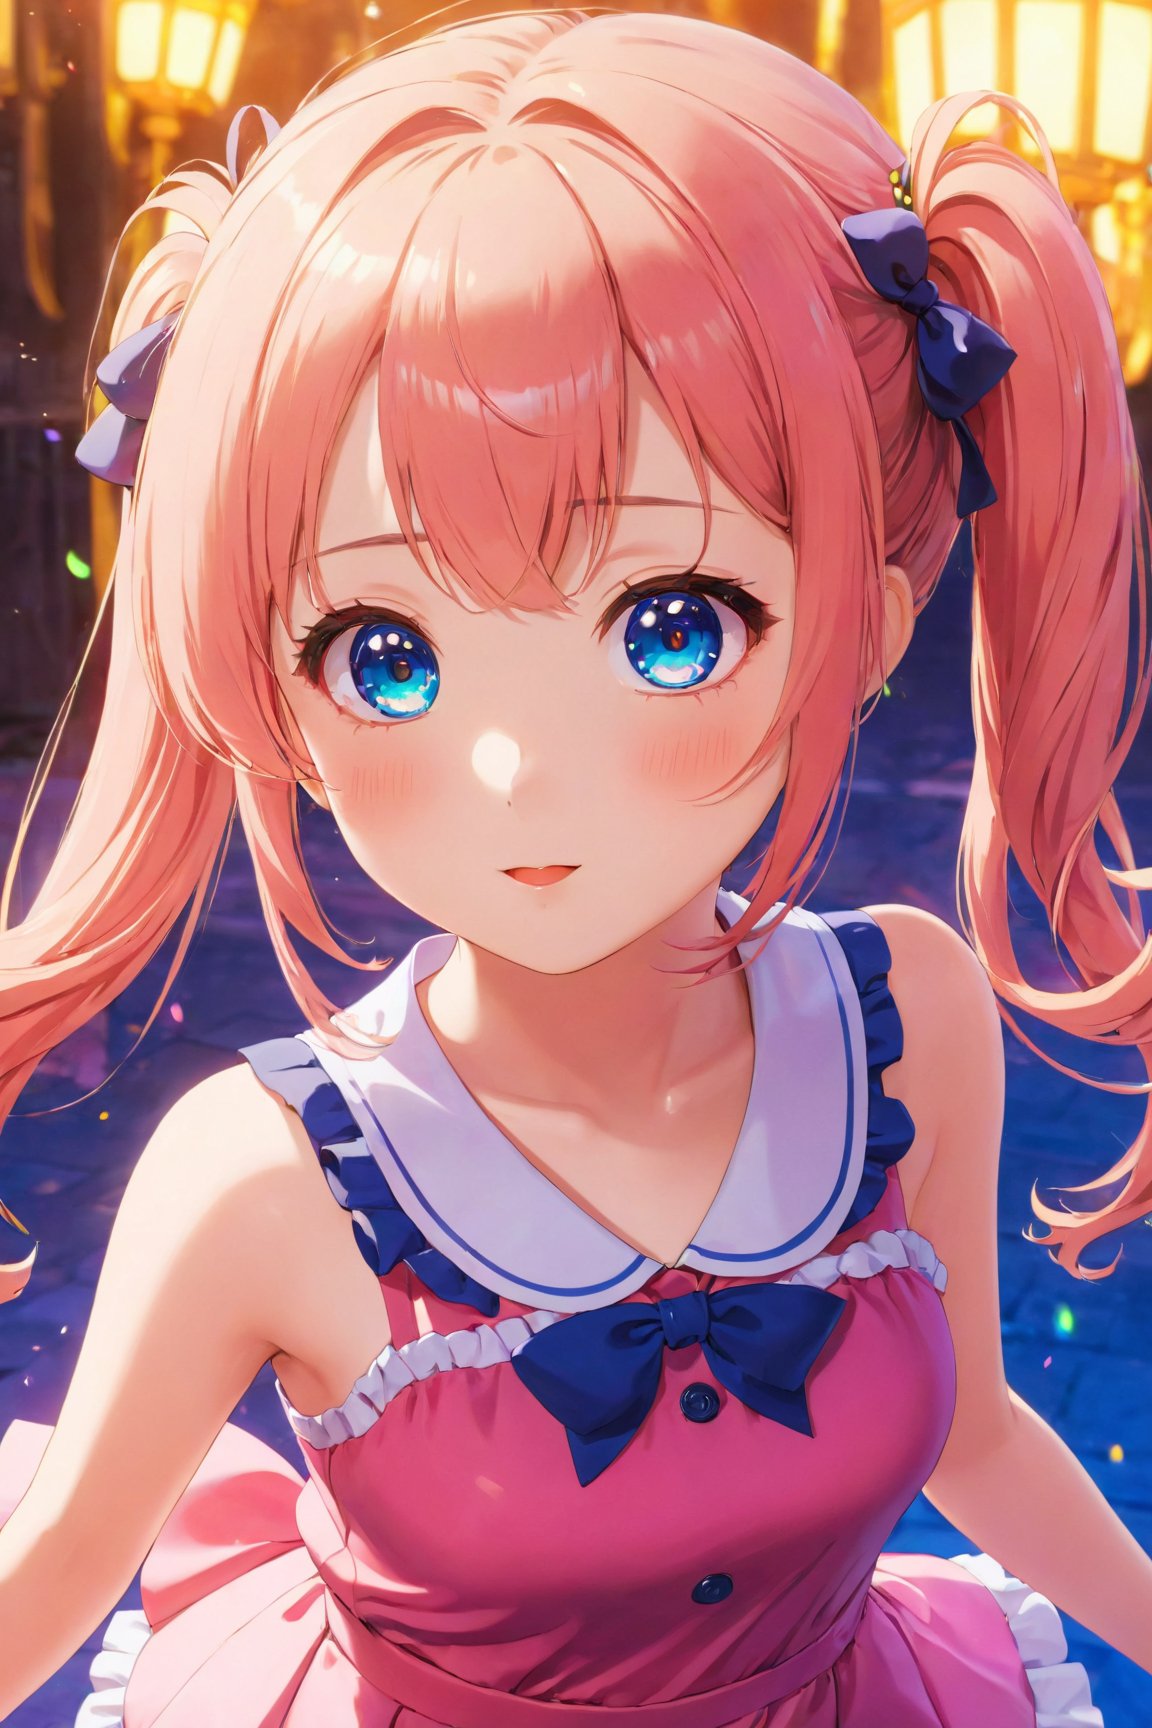 （best quality,4k,8k,highres,masterpiece:1.2),cute anime girl in a short crop dress,large bright eyes and rosy cheeks,twintails hairstyle,playful expression,vibrant colors,lively background,anime style,soft lighting